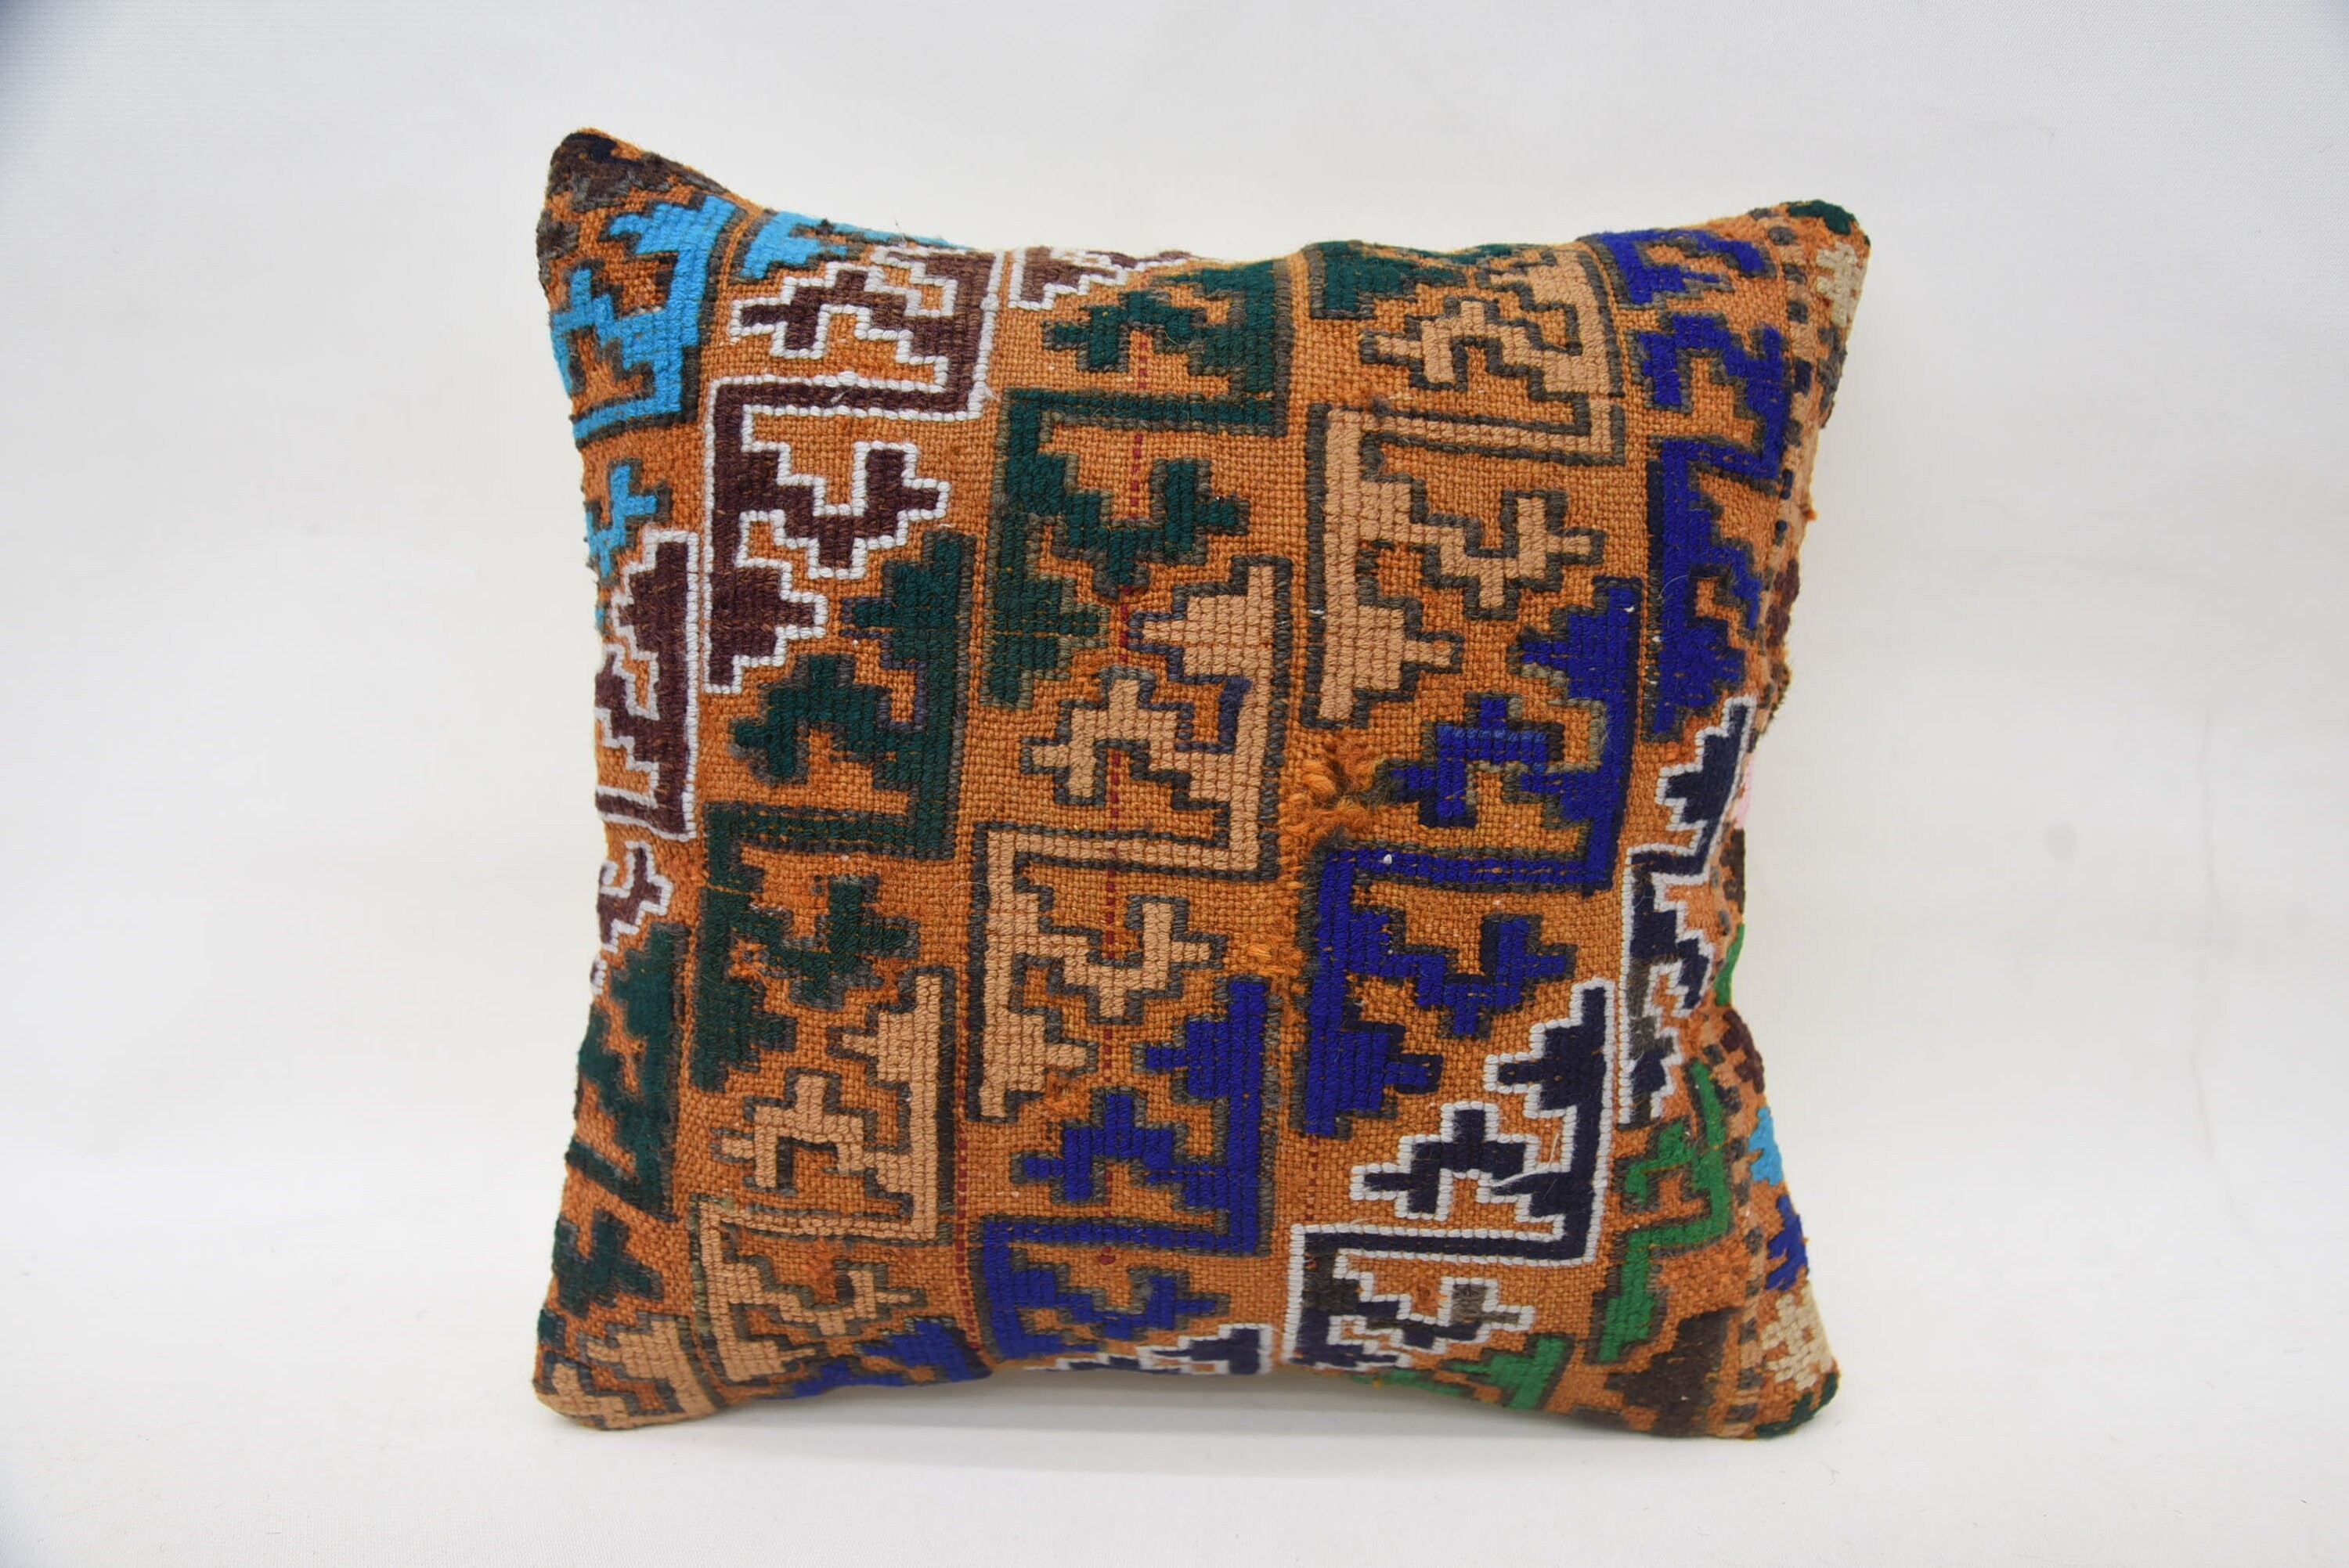 Pillow for Couch, Vintage Pillow, Turkish Pillow, 12"x12" Blue Pillow Sham, Boho Chic Cushion Cover, Lounge Throw Pillow Sham